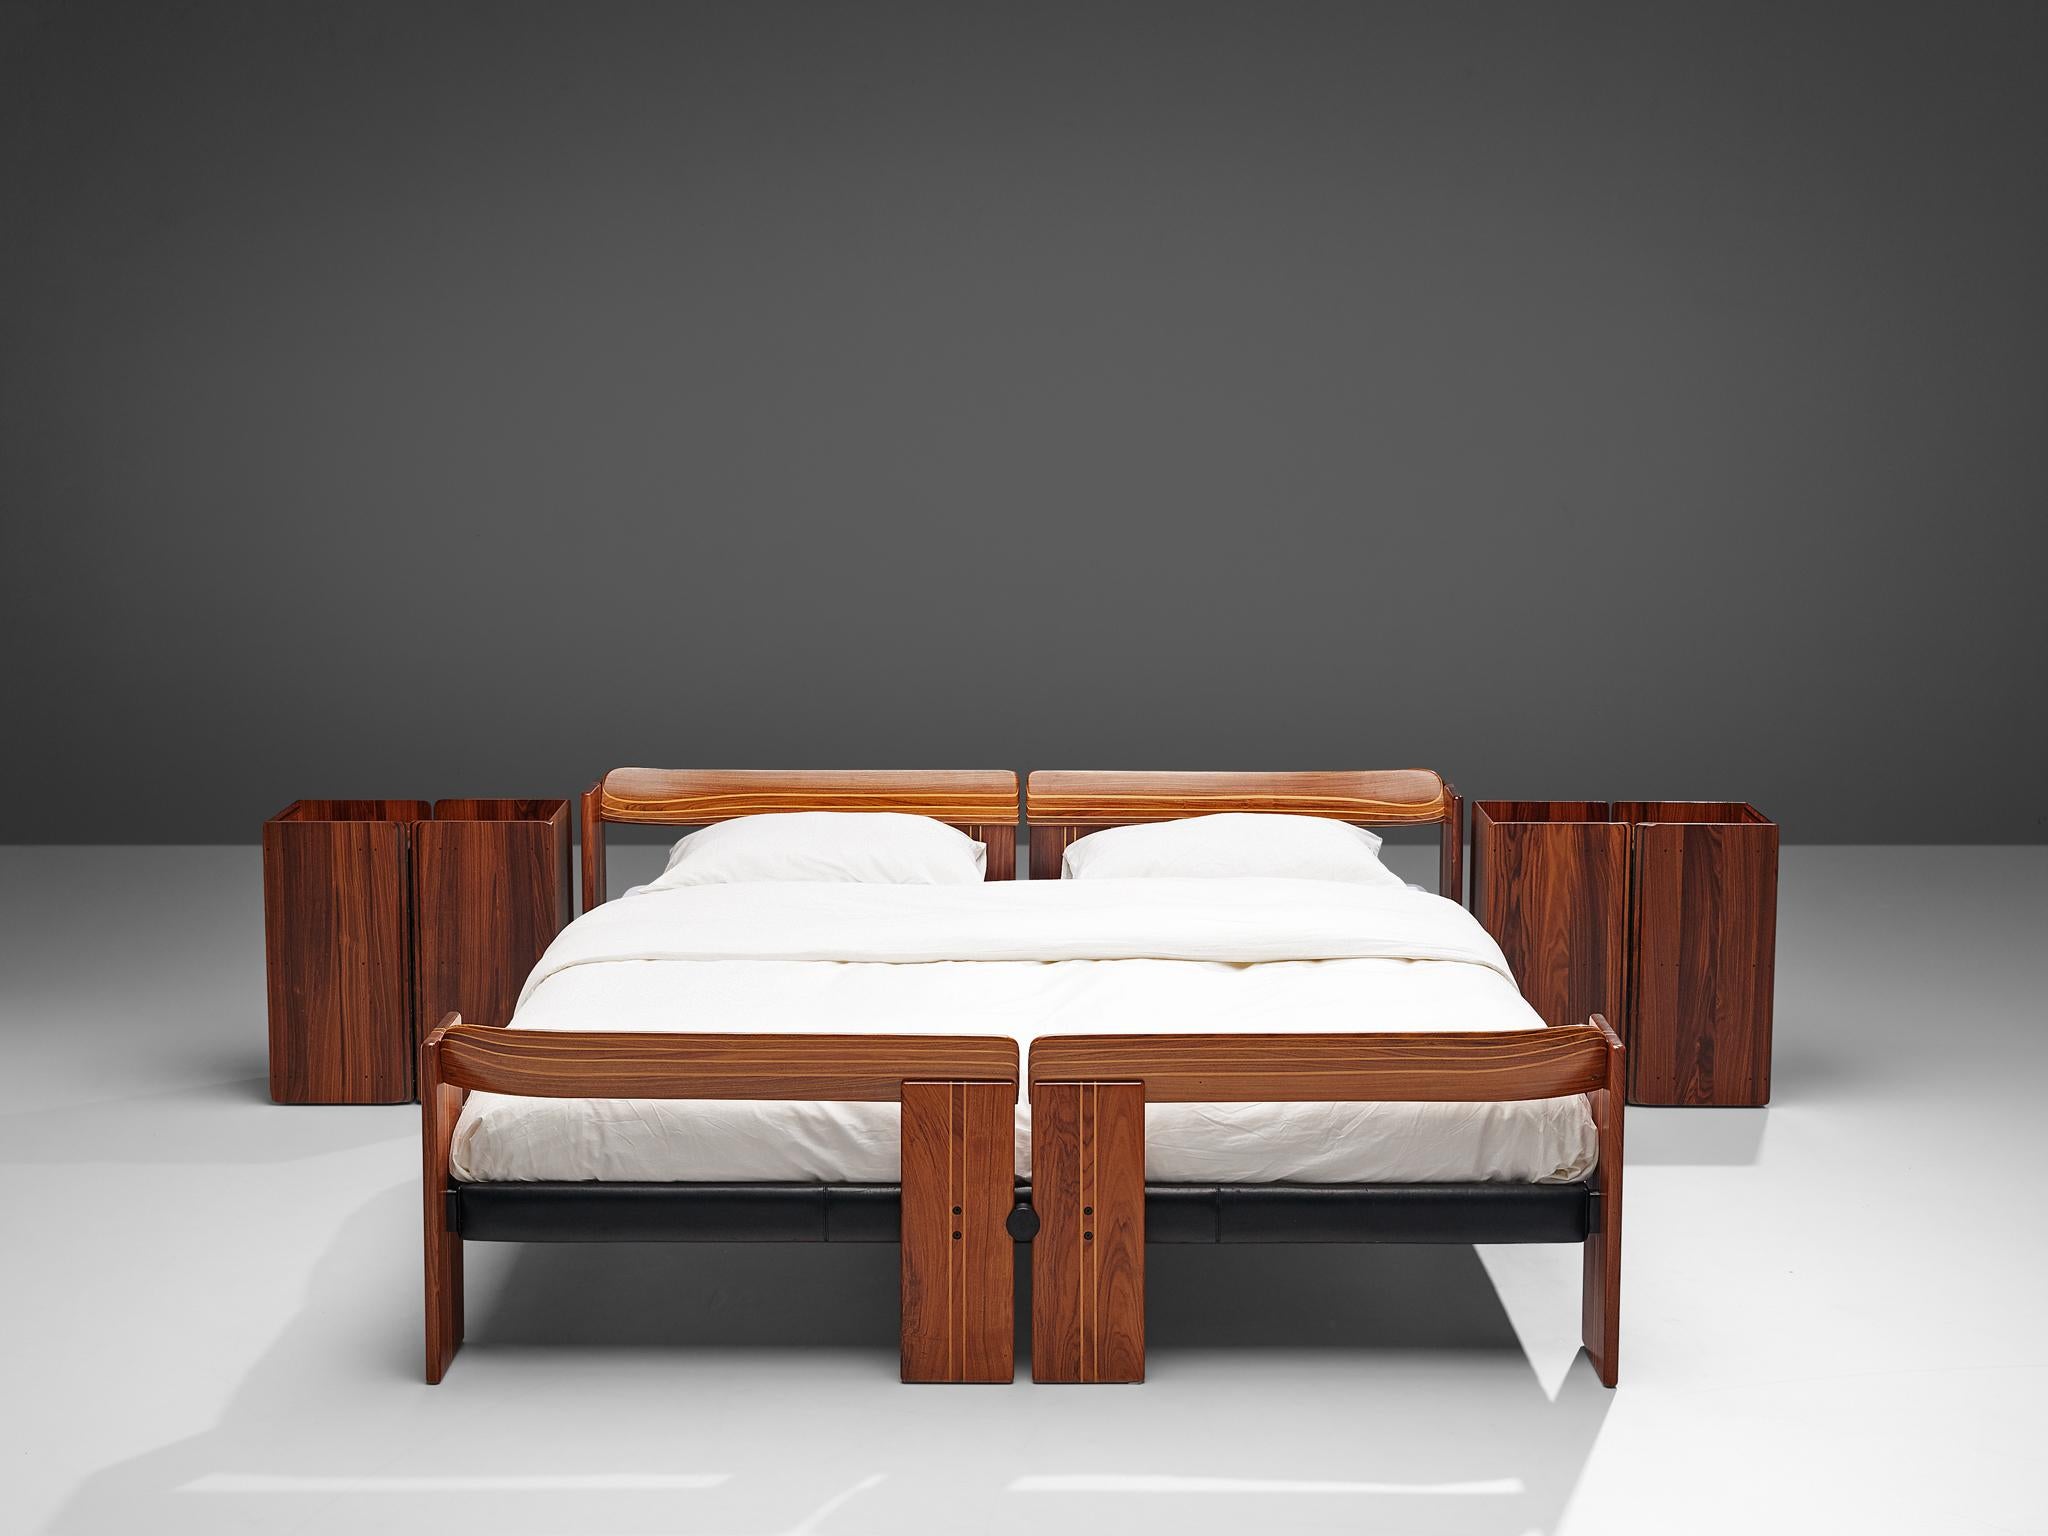 Afra & Tobia Scarpa, 'Artona' bed with nightstands, rosewood and metal, Italy, 1975.

The Artona line by the Scarpa duo was in fact the first line ever produced by Maxalto, the specialist division of B&B Italia. Maxalto was originally set up in 1975